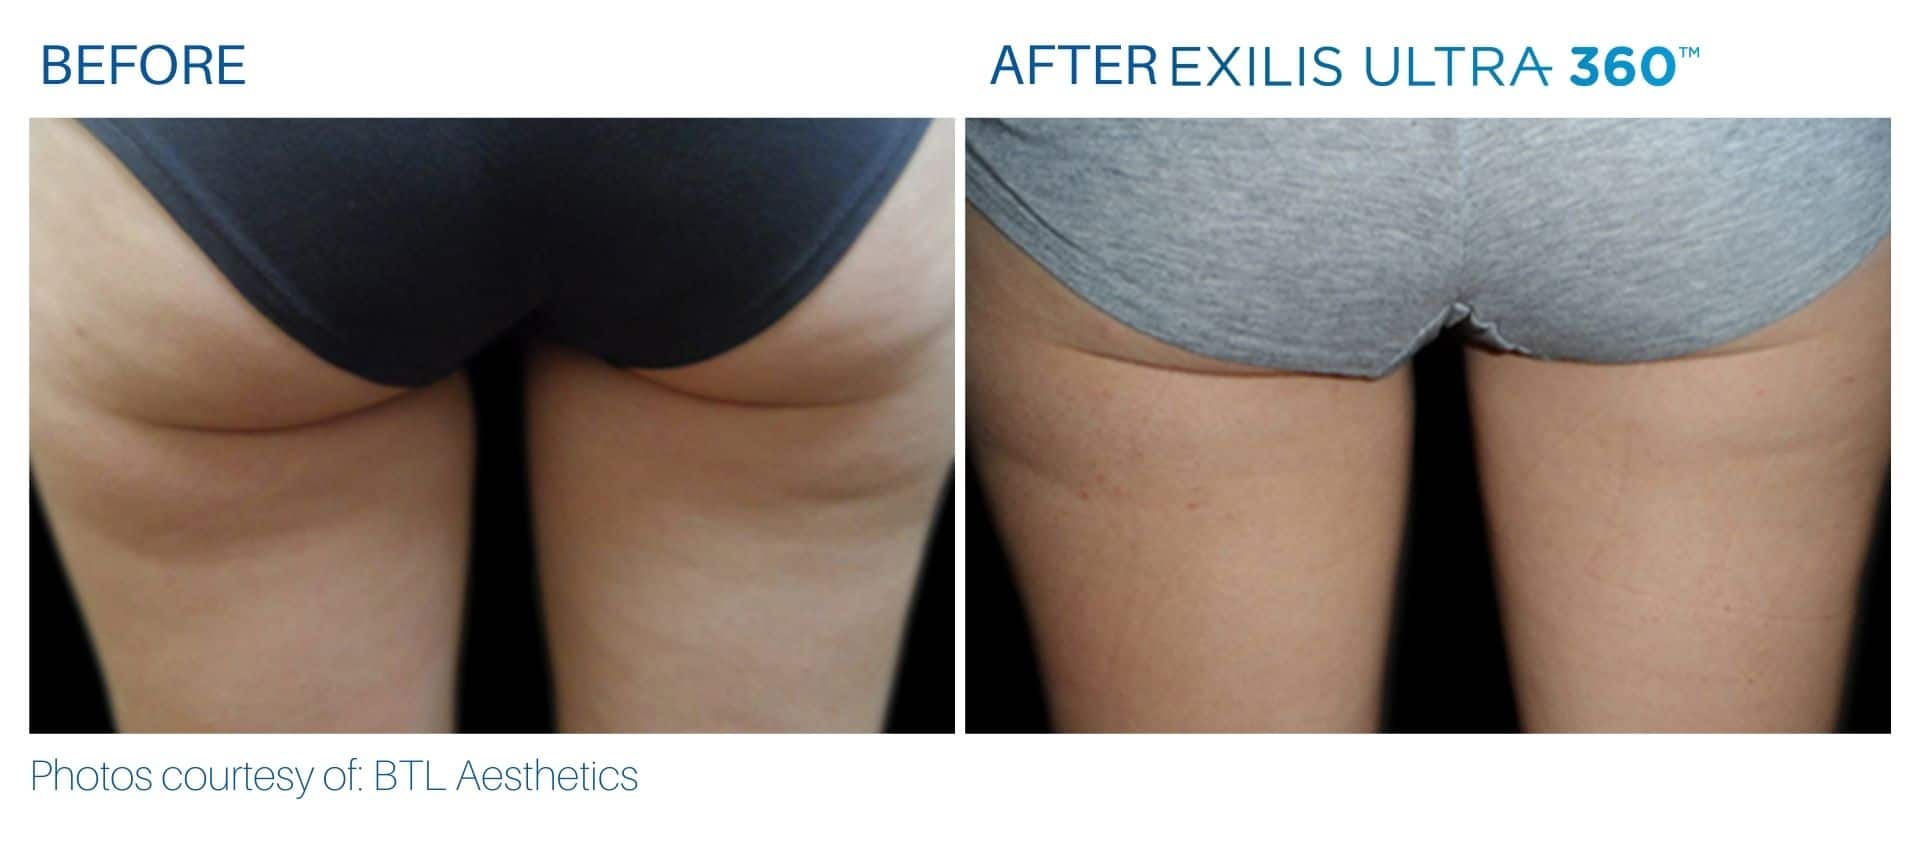 exilis ultra before and after treatment buttocks area